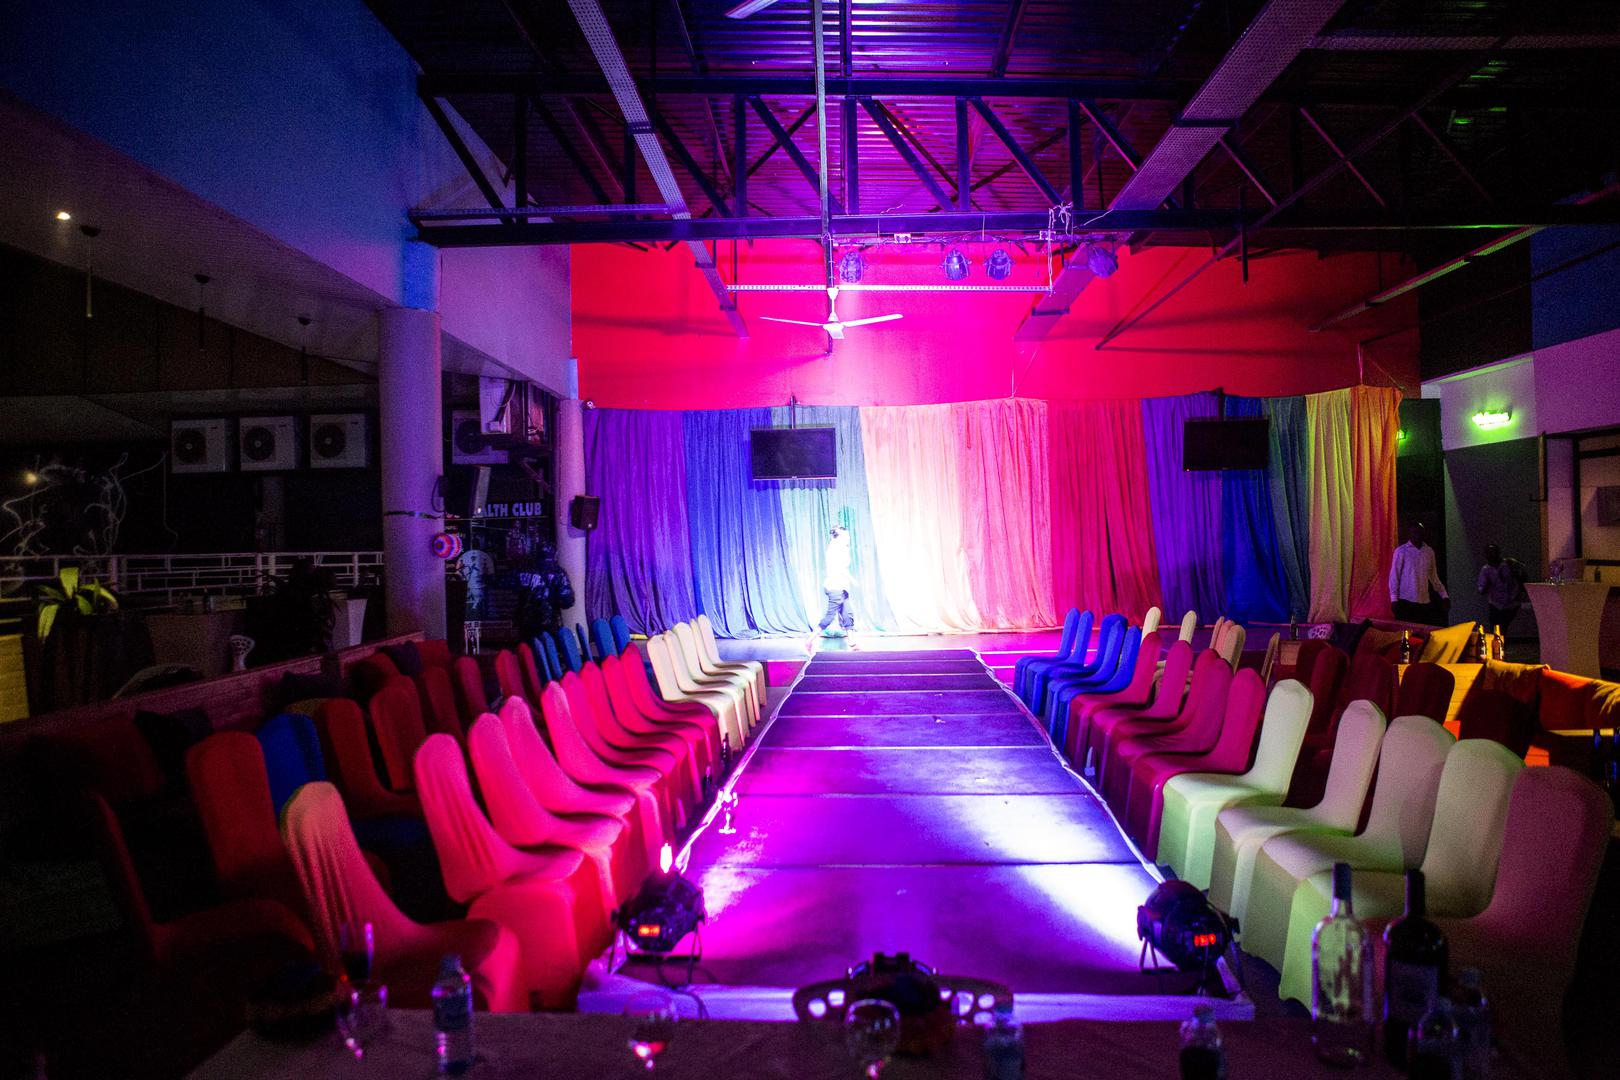 The venue for Uganda’s Pride 2016 pageant that police raided on August 4, 2016.